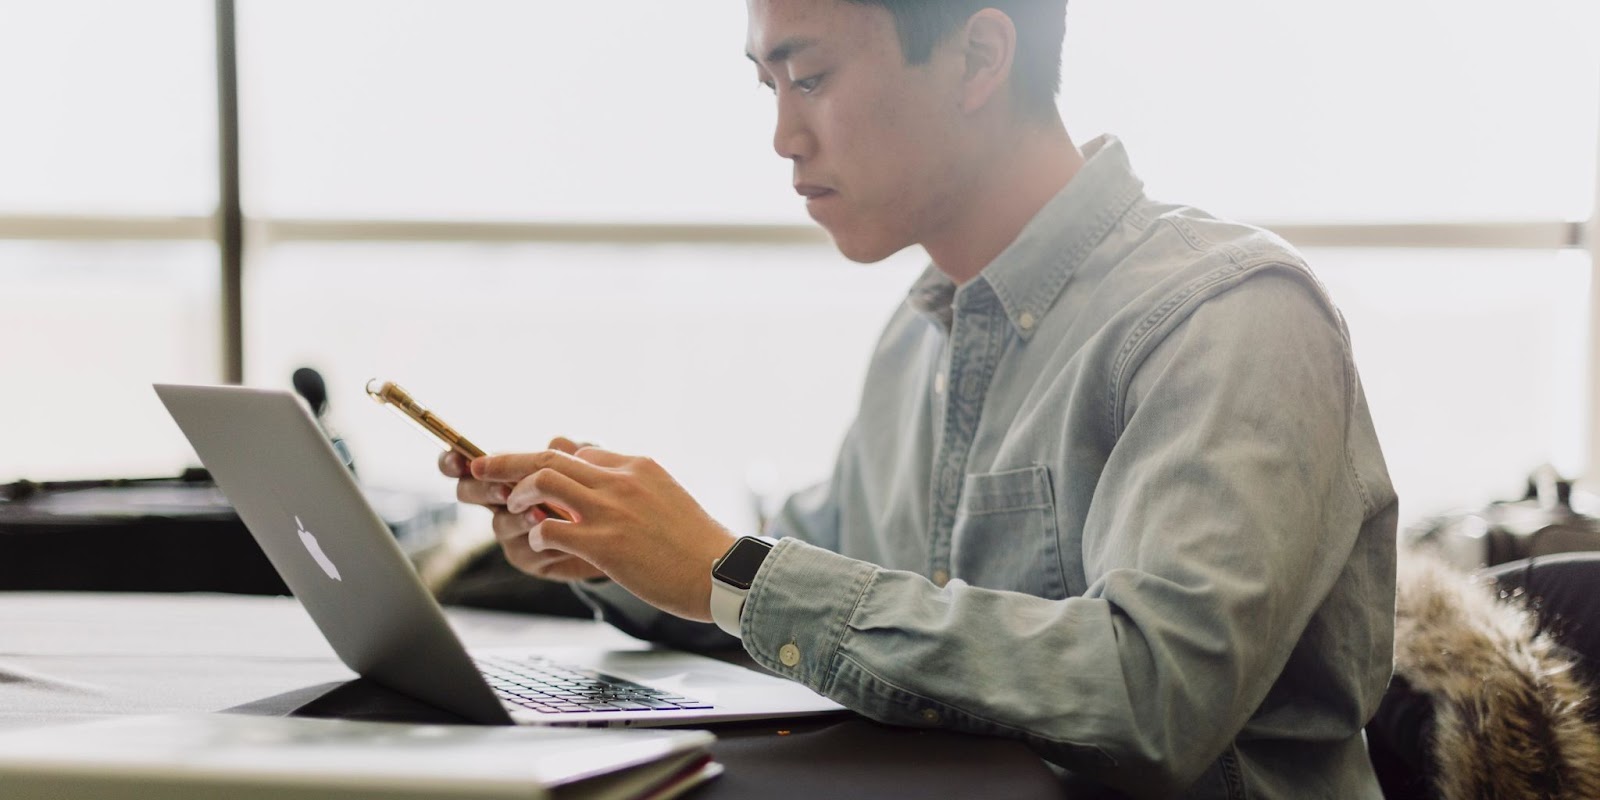 A young Asian man in a button down shirt sits at his desk, looking into his phone, with a laptop open in front of him.